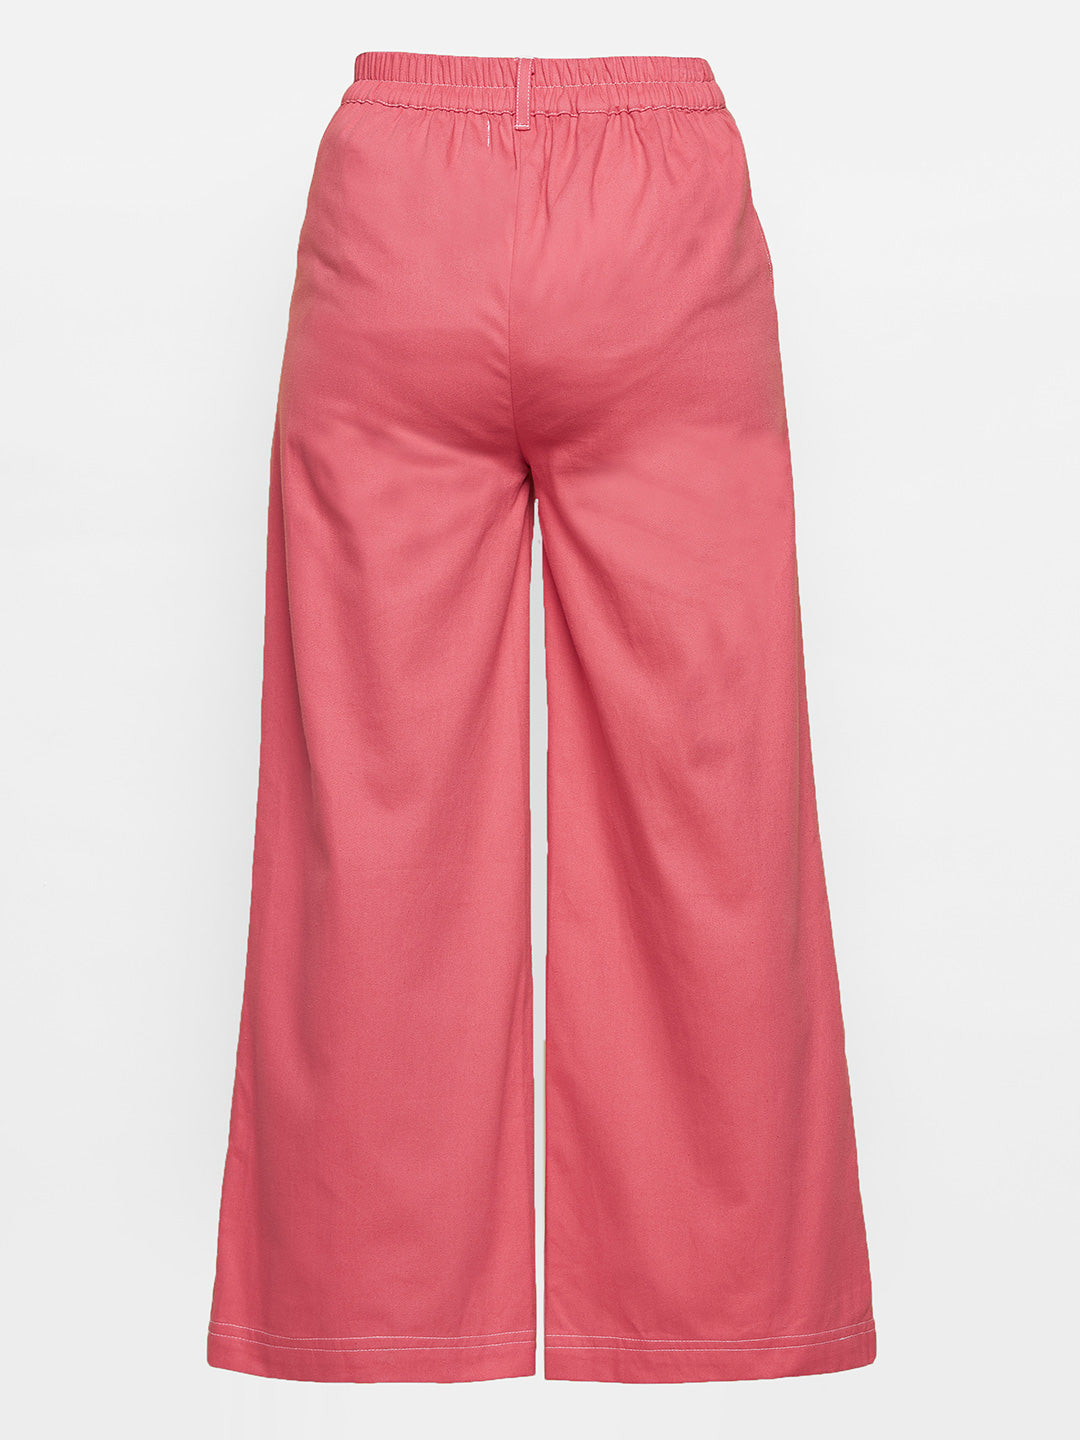 Girls Red Contrast Thread Twill Straight Pants